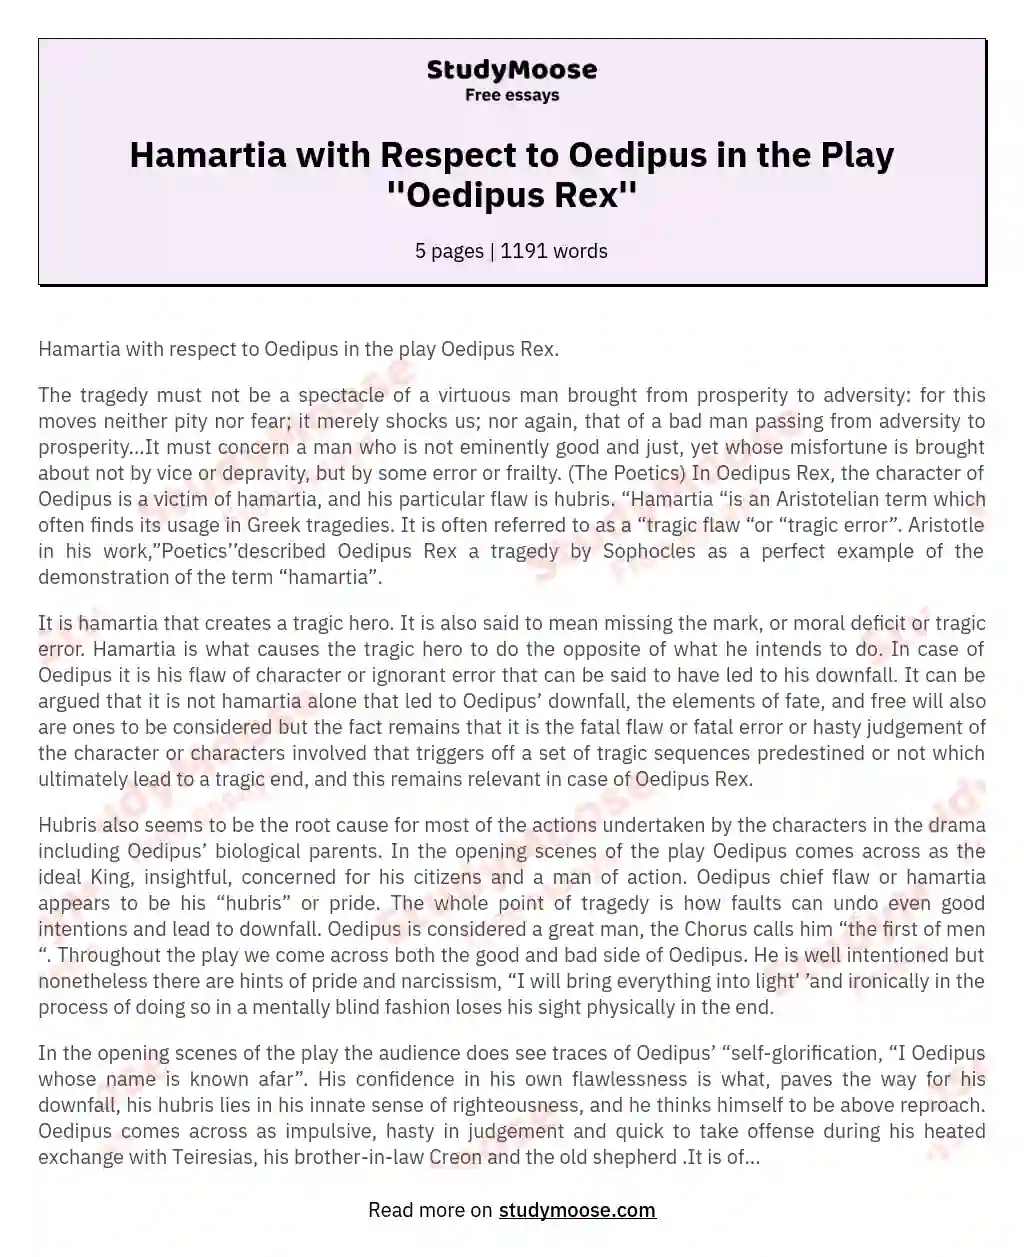 Hamartia with Respect to Oedipus in the Play ''Oedipus Rex'' essay